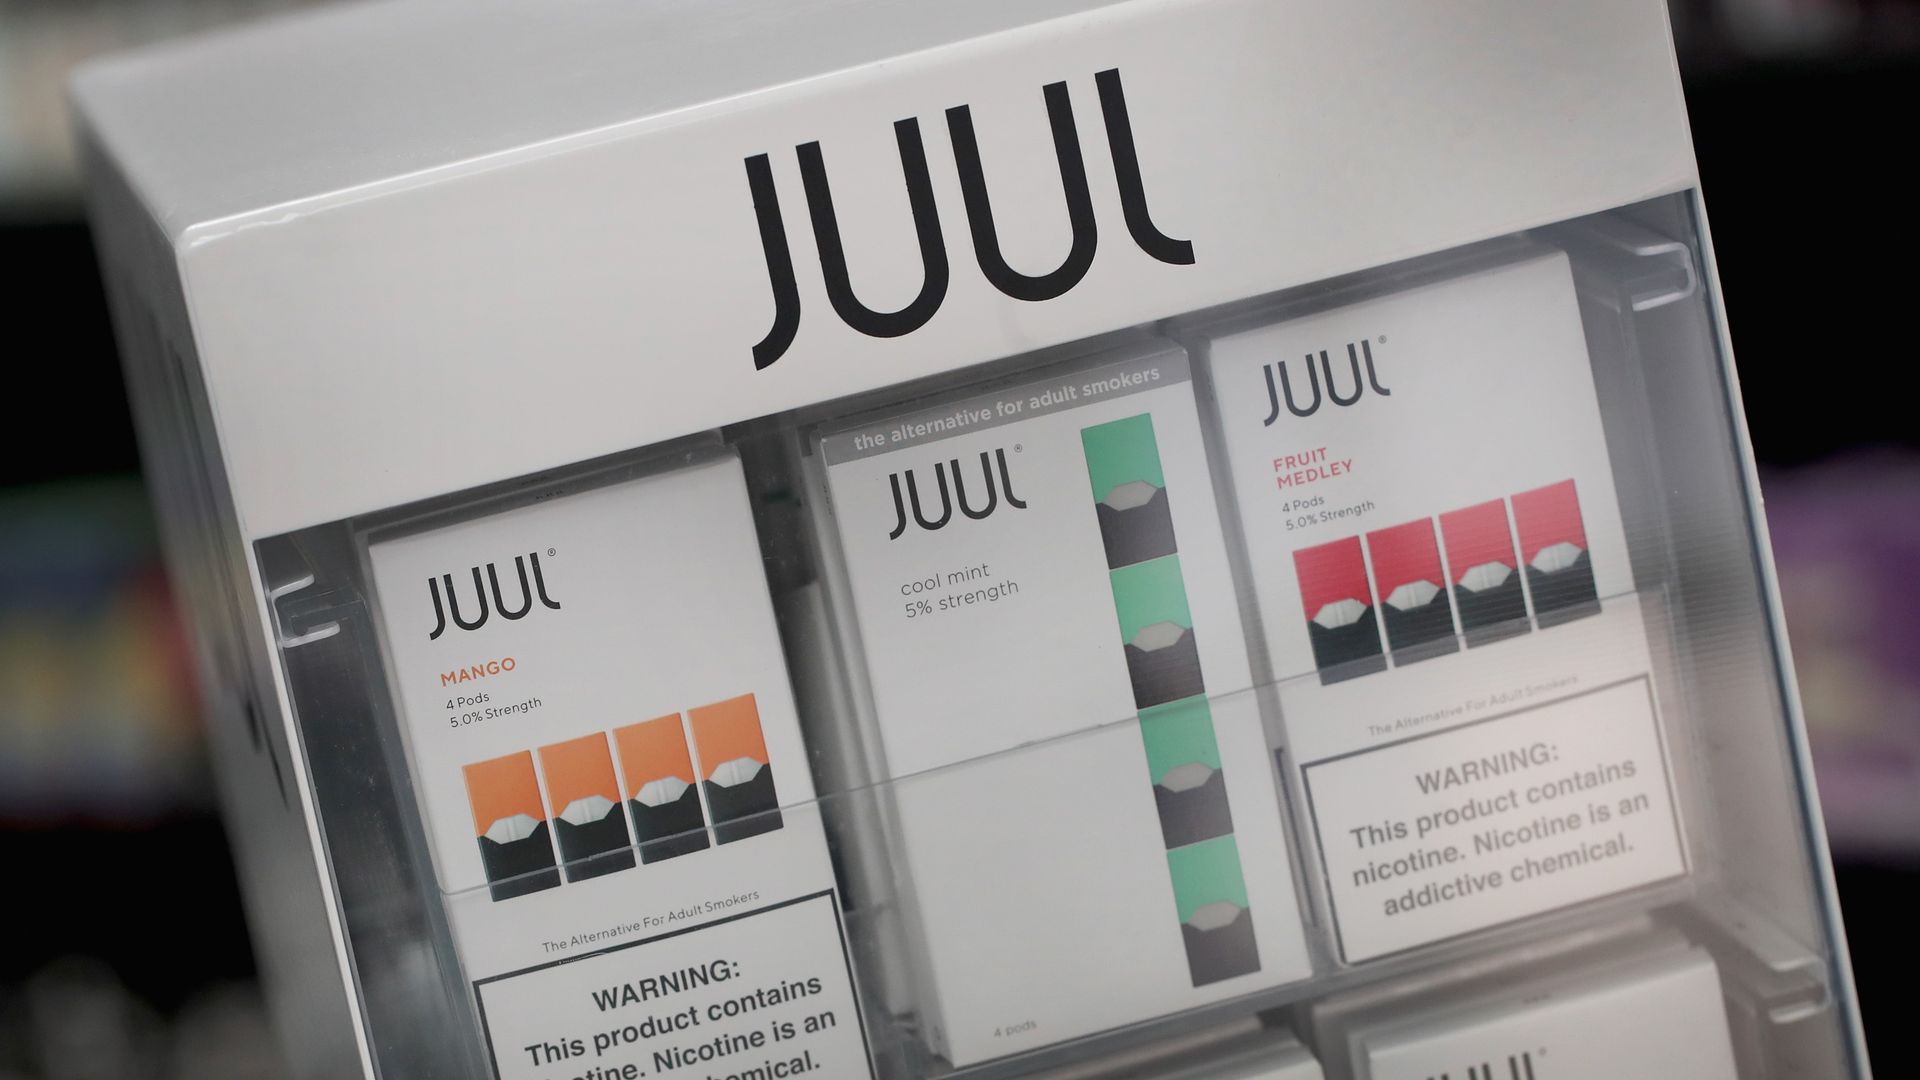 Juul vaping pods being sold